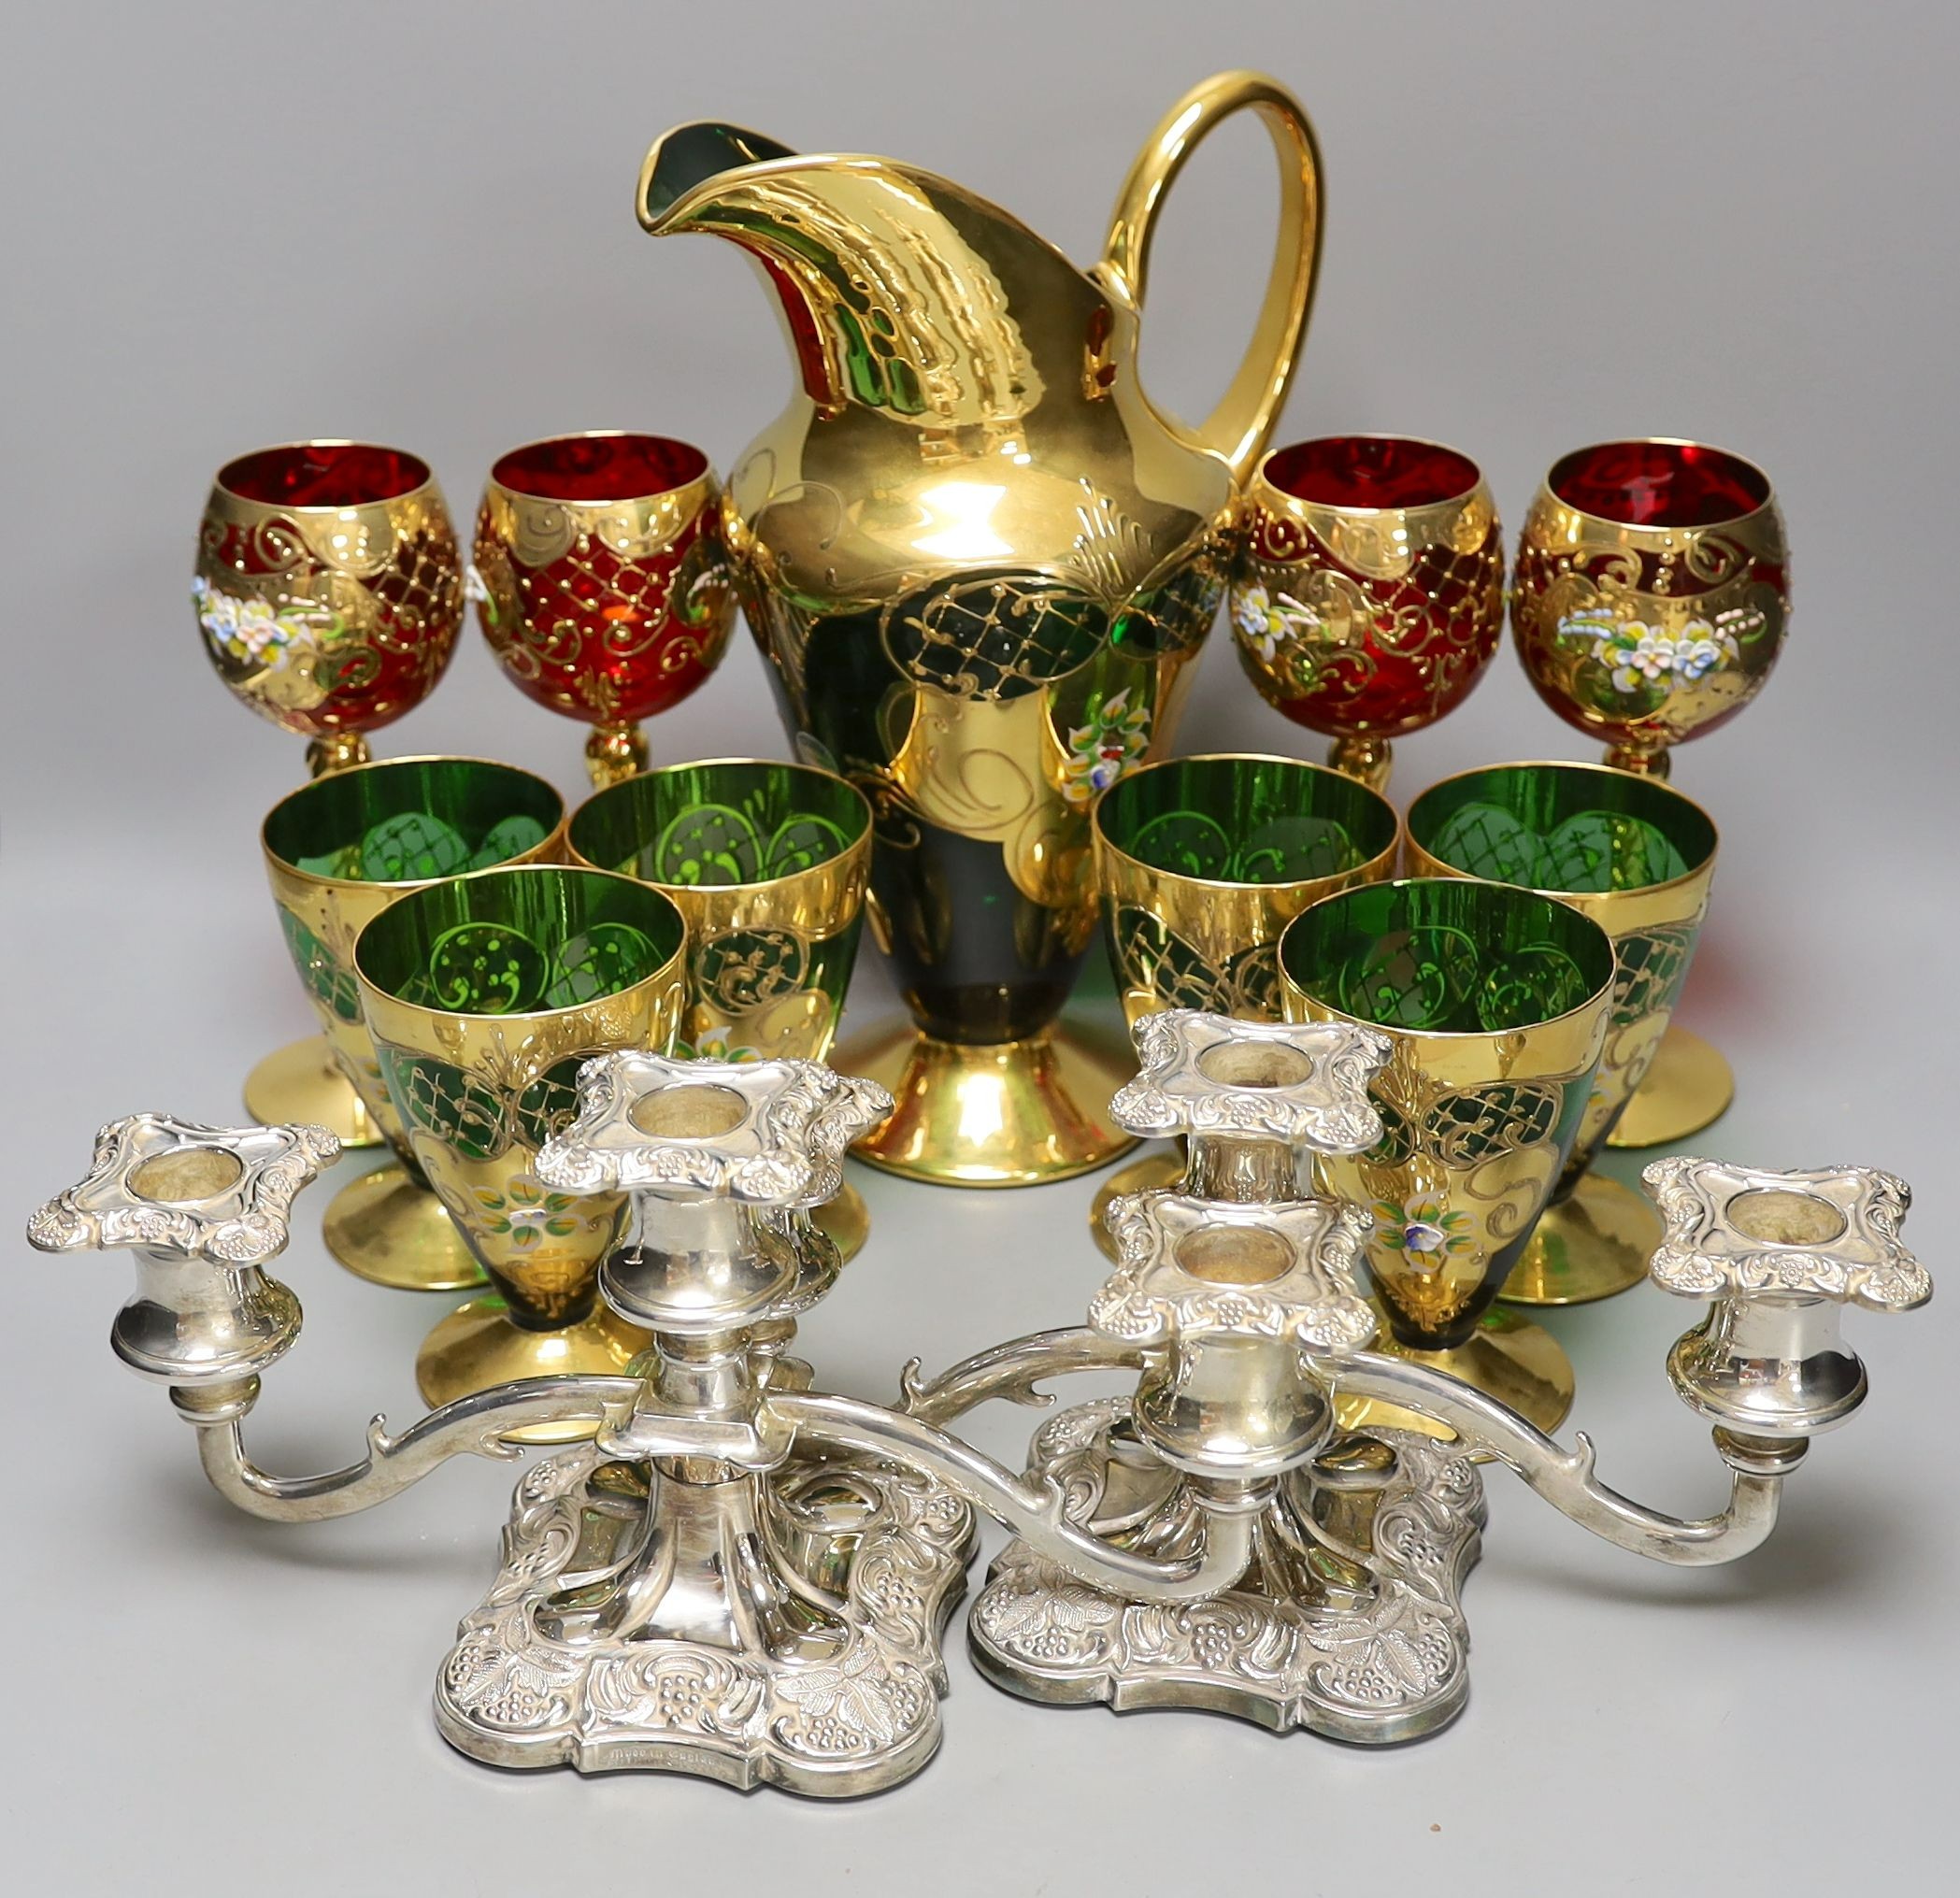 A Venetian green glass lemonade set, 4 red glass wine glasses and a pair of plated candelabra,jug 29